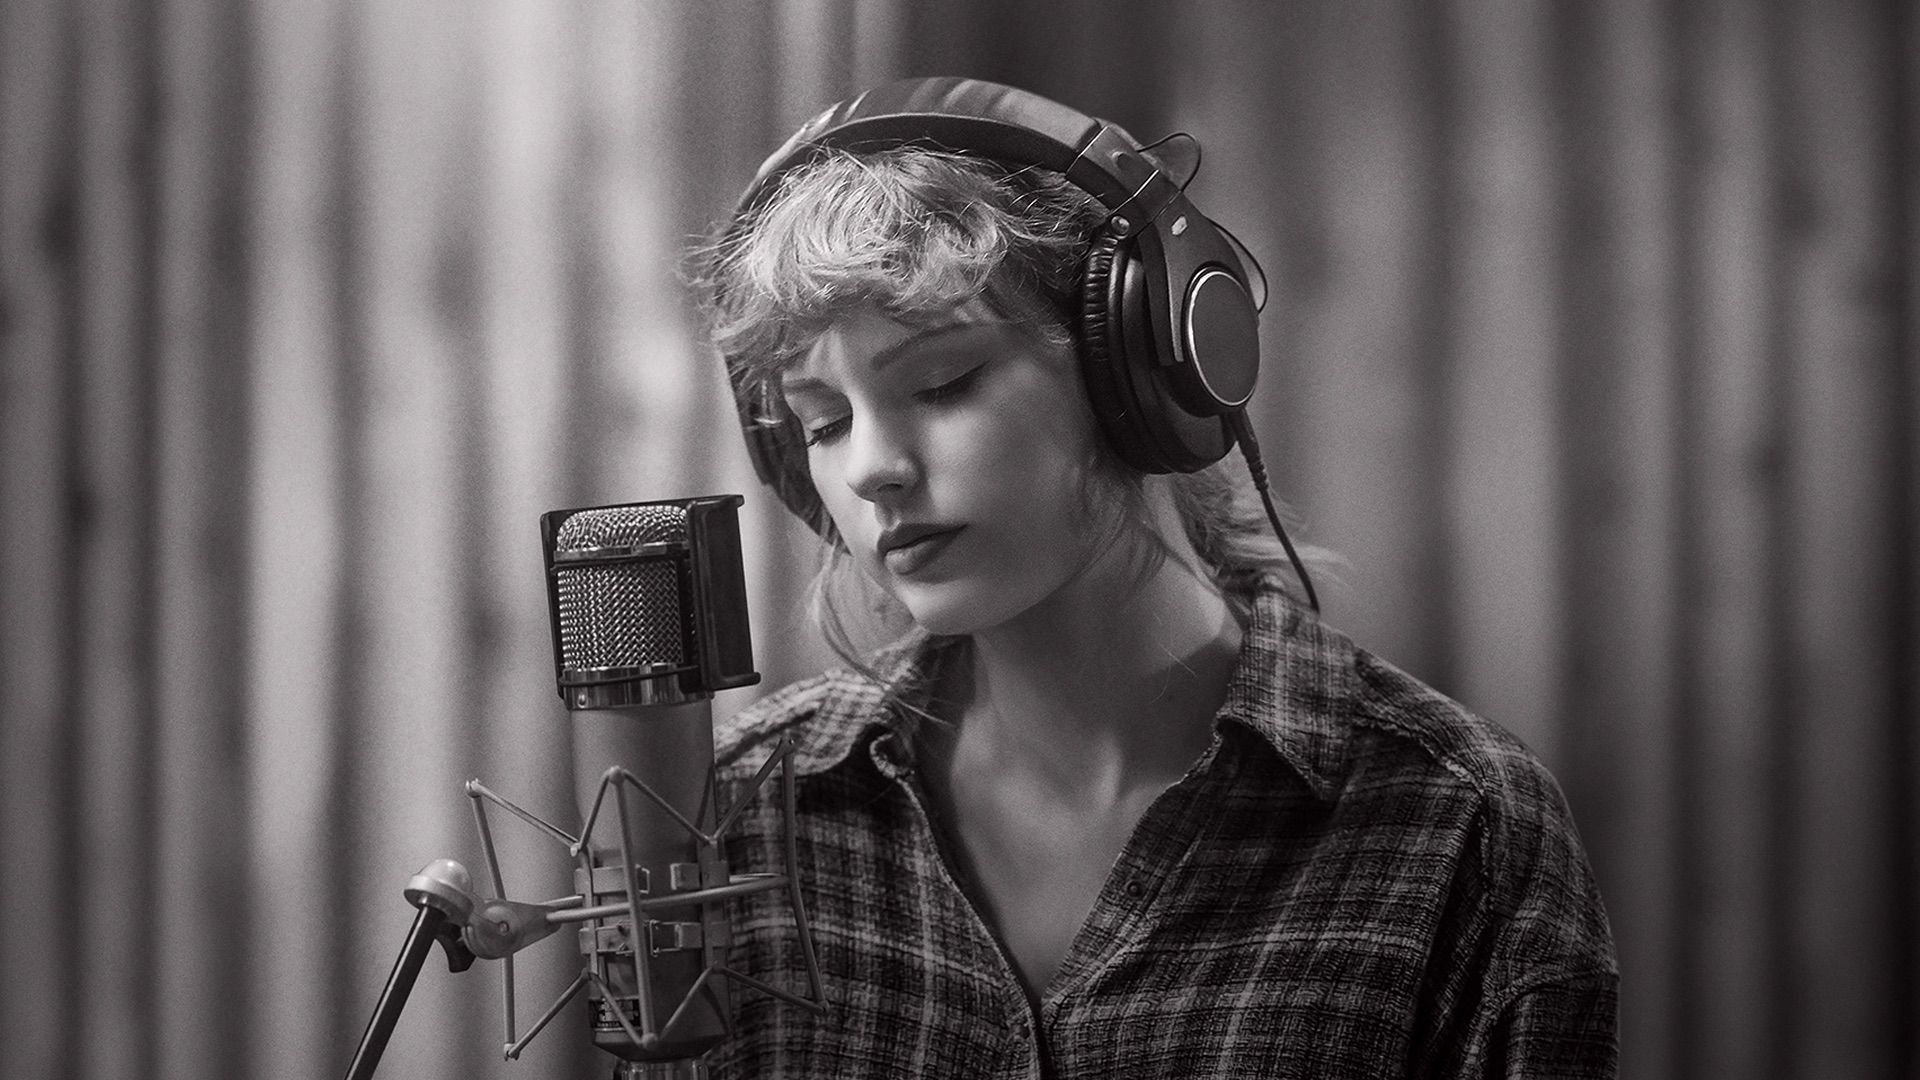 Evermore': Taylor Swift to drop another 2020 album at midnight